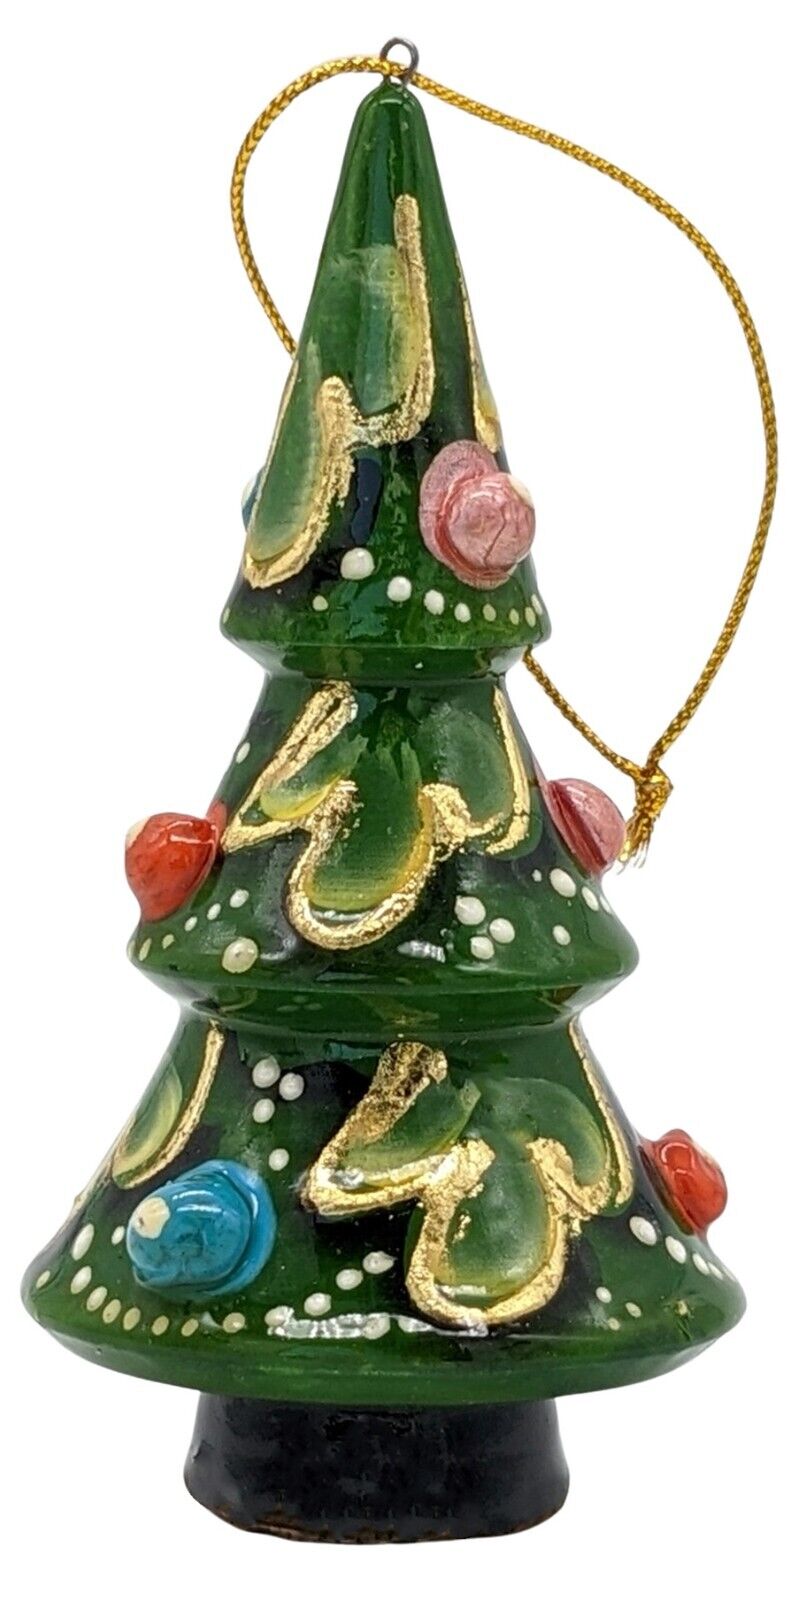 Hand Carved and Painted Russian Christmas Tree Ornament, 3 1/2